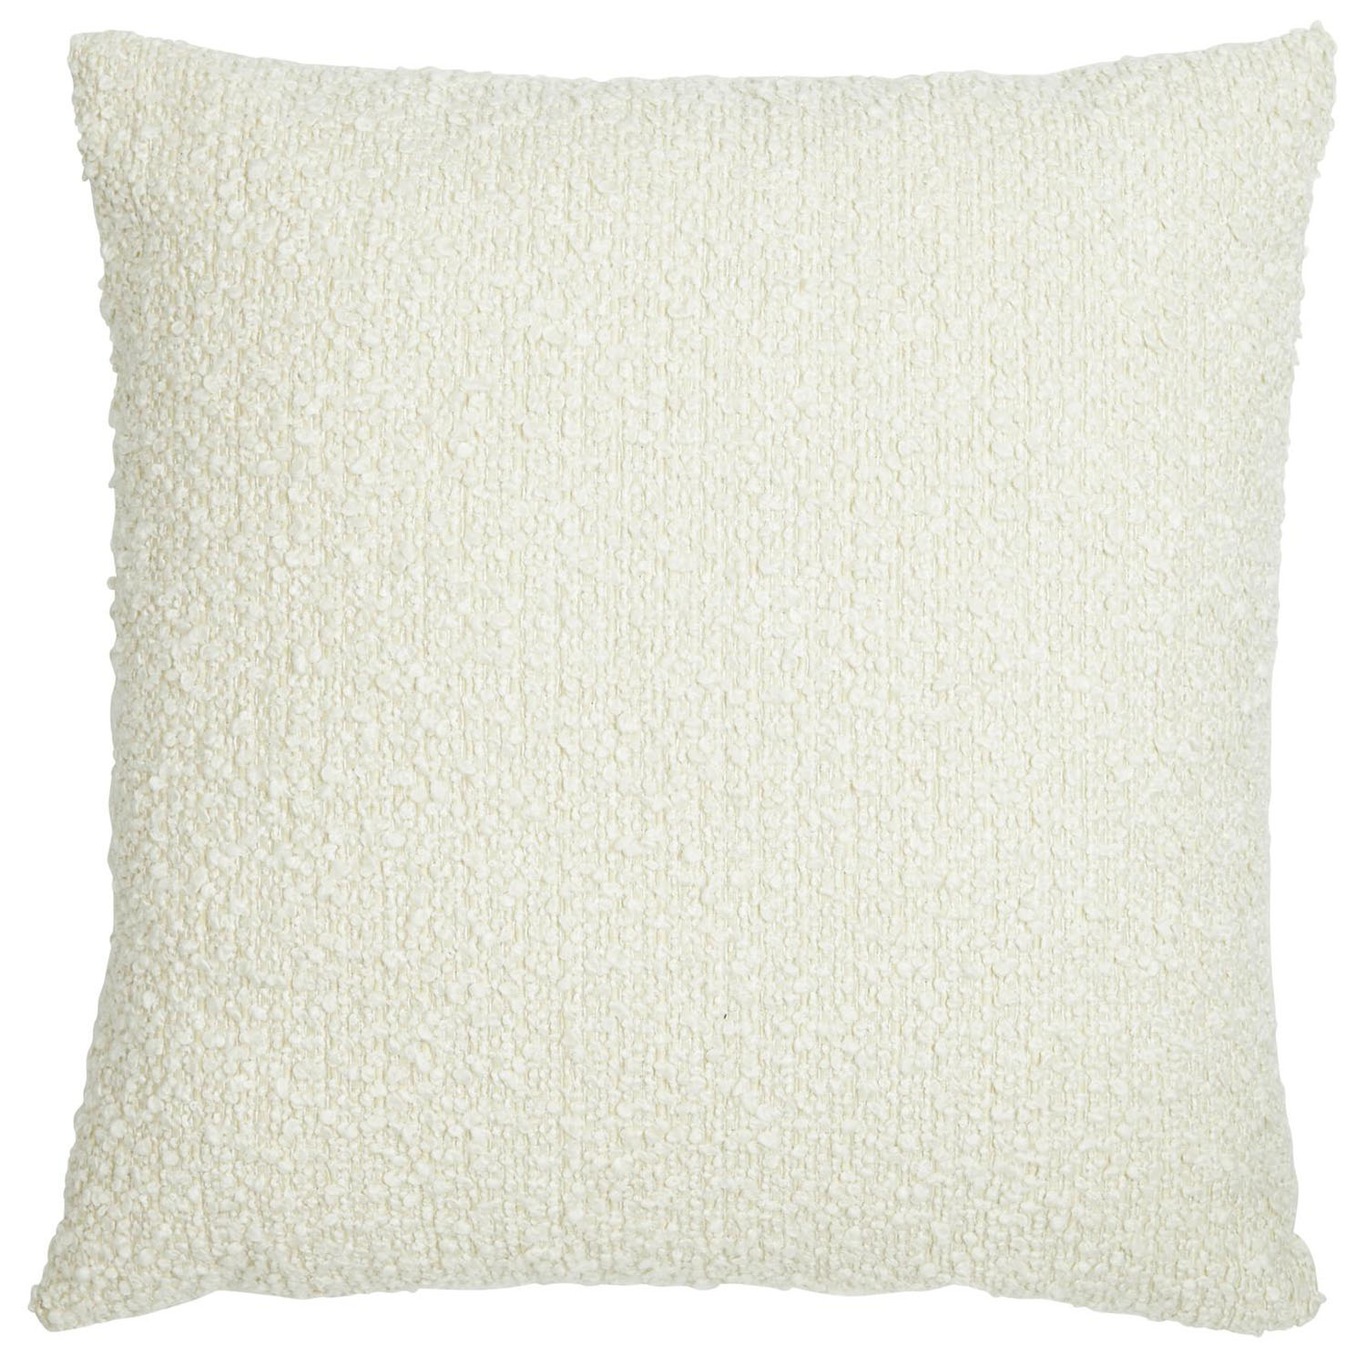 Boucle moment Cushion Cover 45X45 cm, Off-white